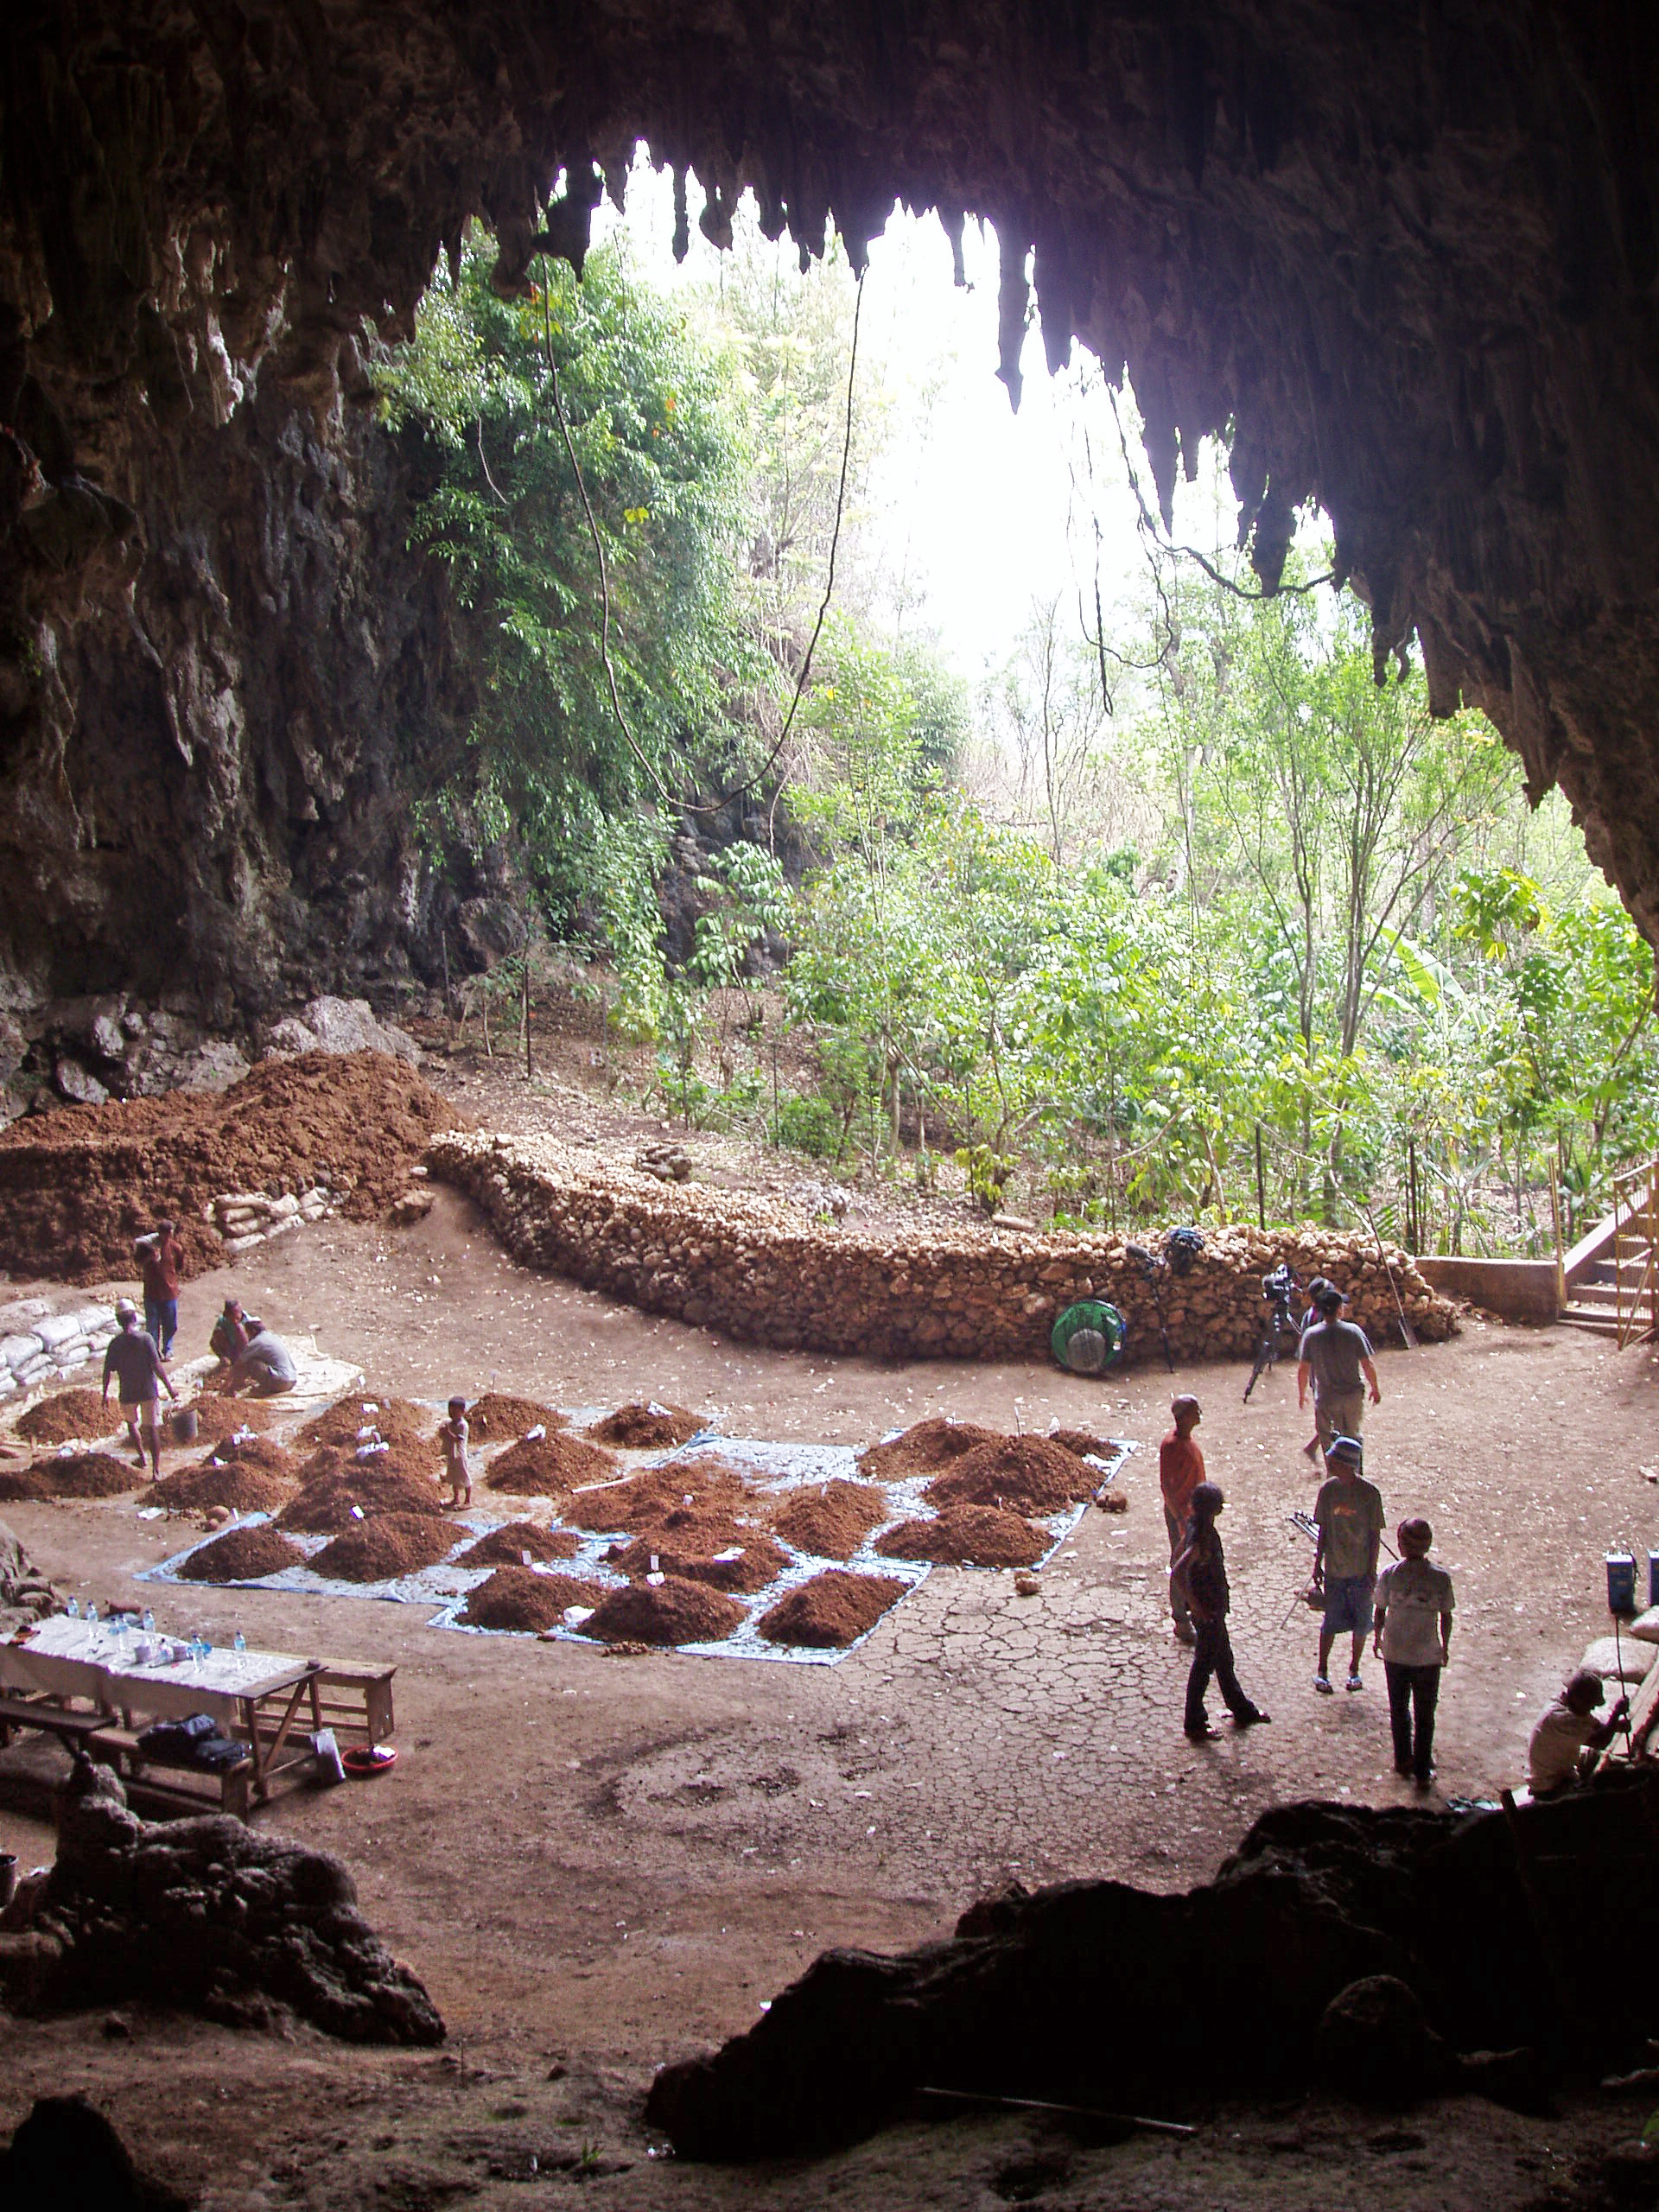 Excavations at Liang Bua cave, the discovery site of Homo floresiensis; the famous 'Hobbit' of Flores." (Photo: A. Brumm).